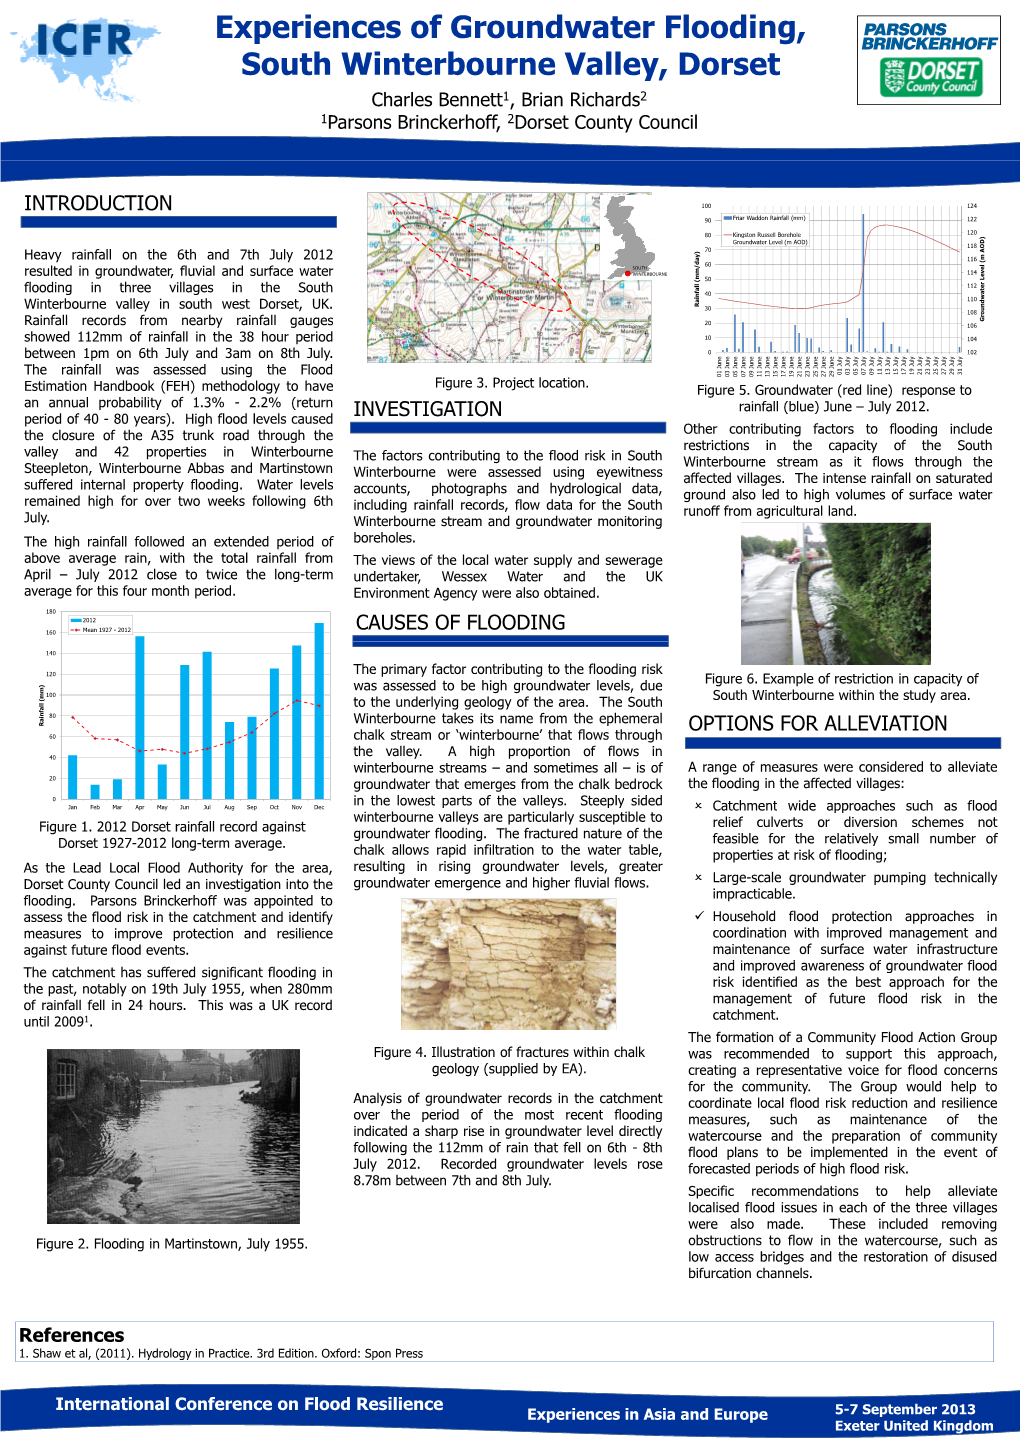 Experiences of Groundwater Flooding, South Winterbourne Valley, Dorset Charles Bennett1, Brian Richards2 1Parsons Brinckerhoff, 2Dorset County Council